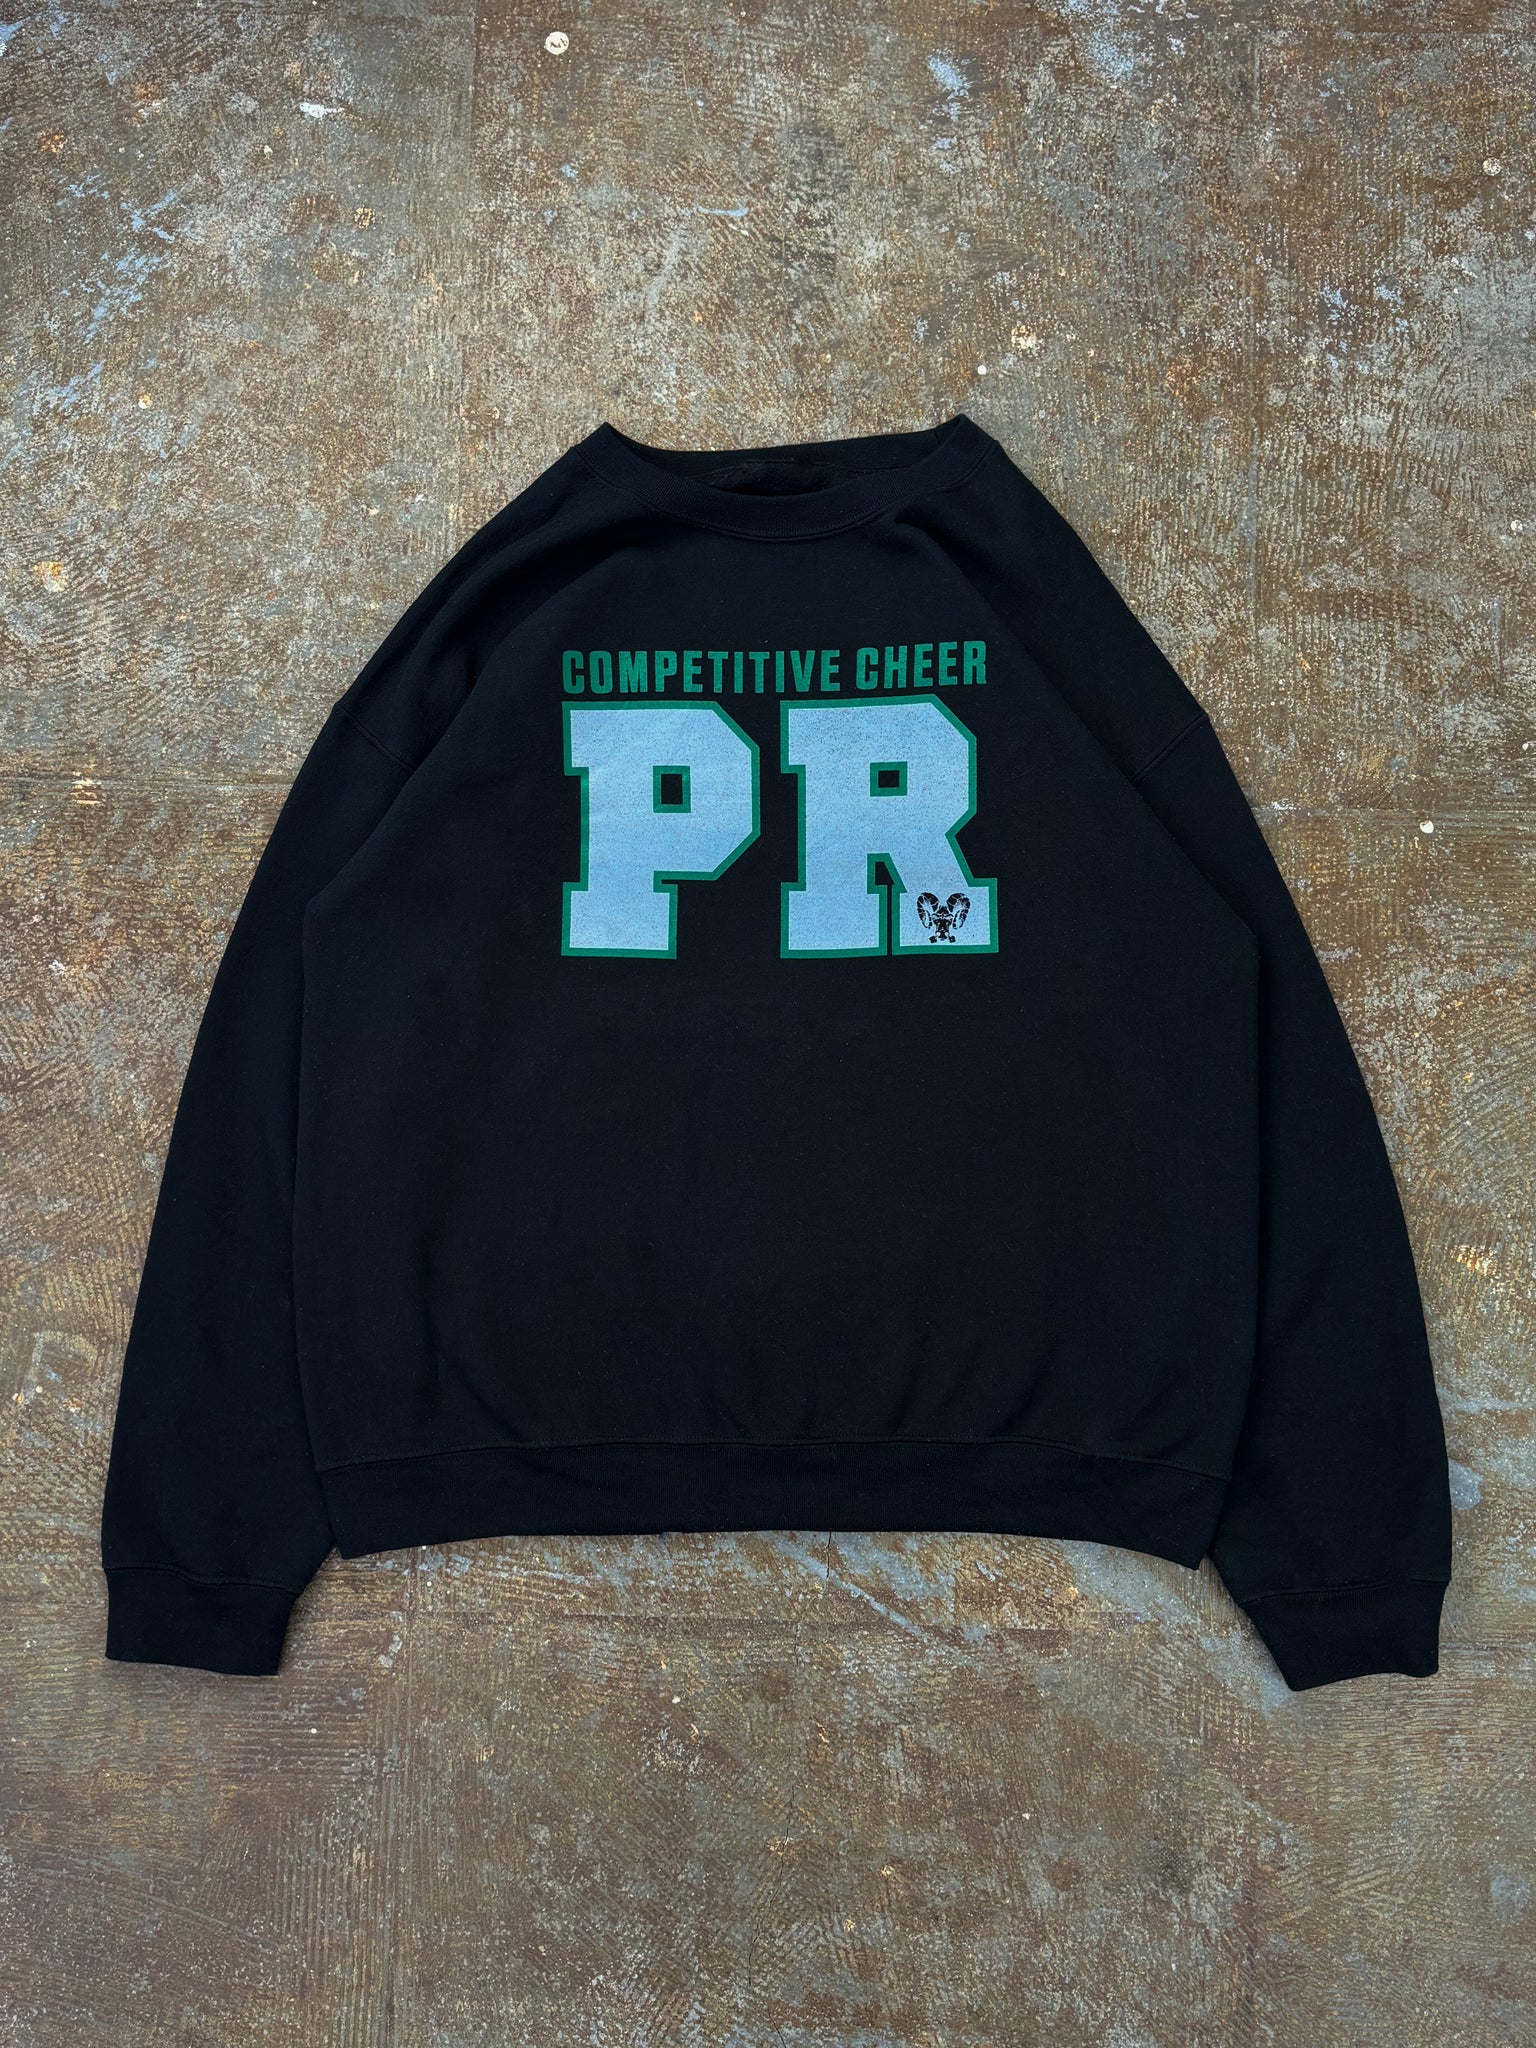 COMPETITIVE CHEER SWEATER